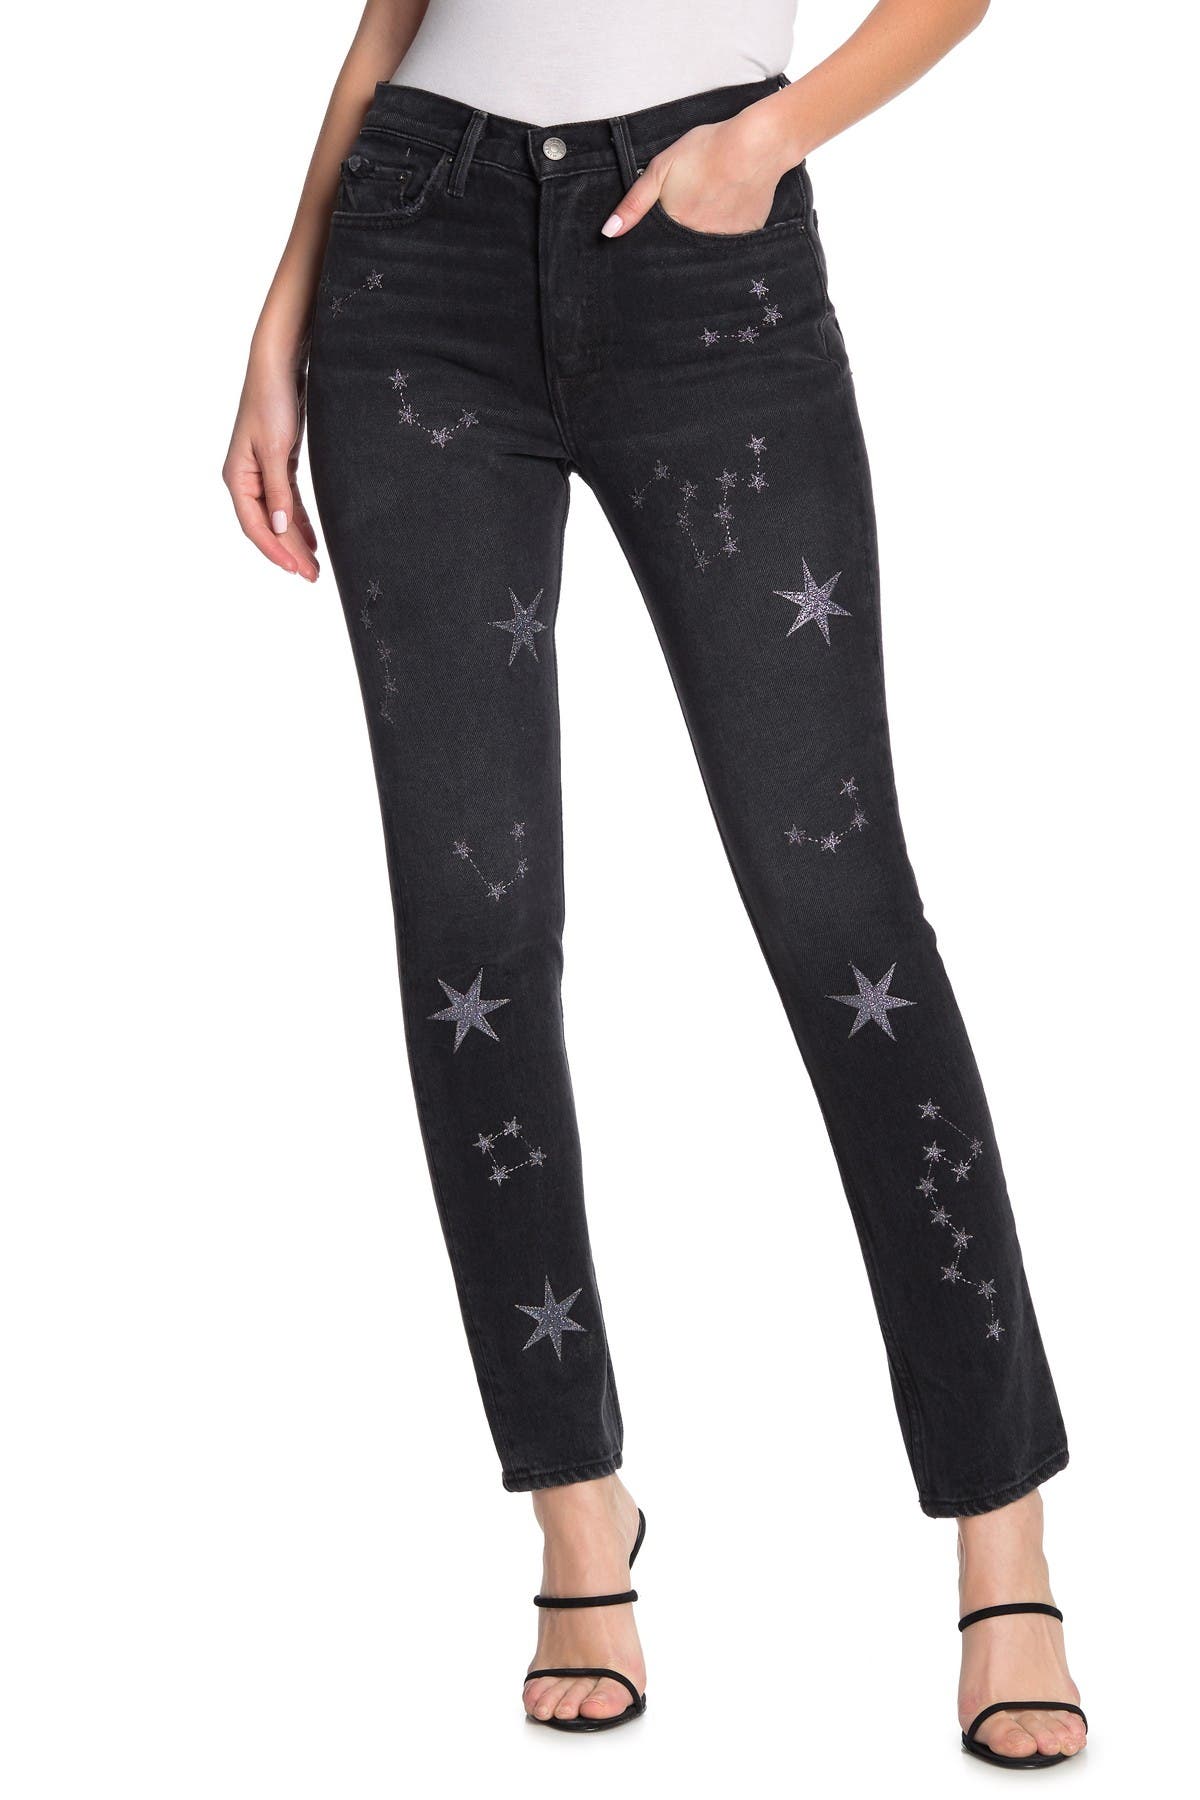 madewell constellation jeans